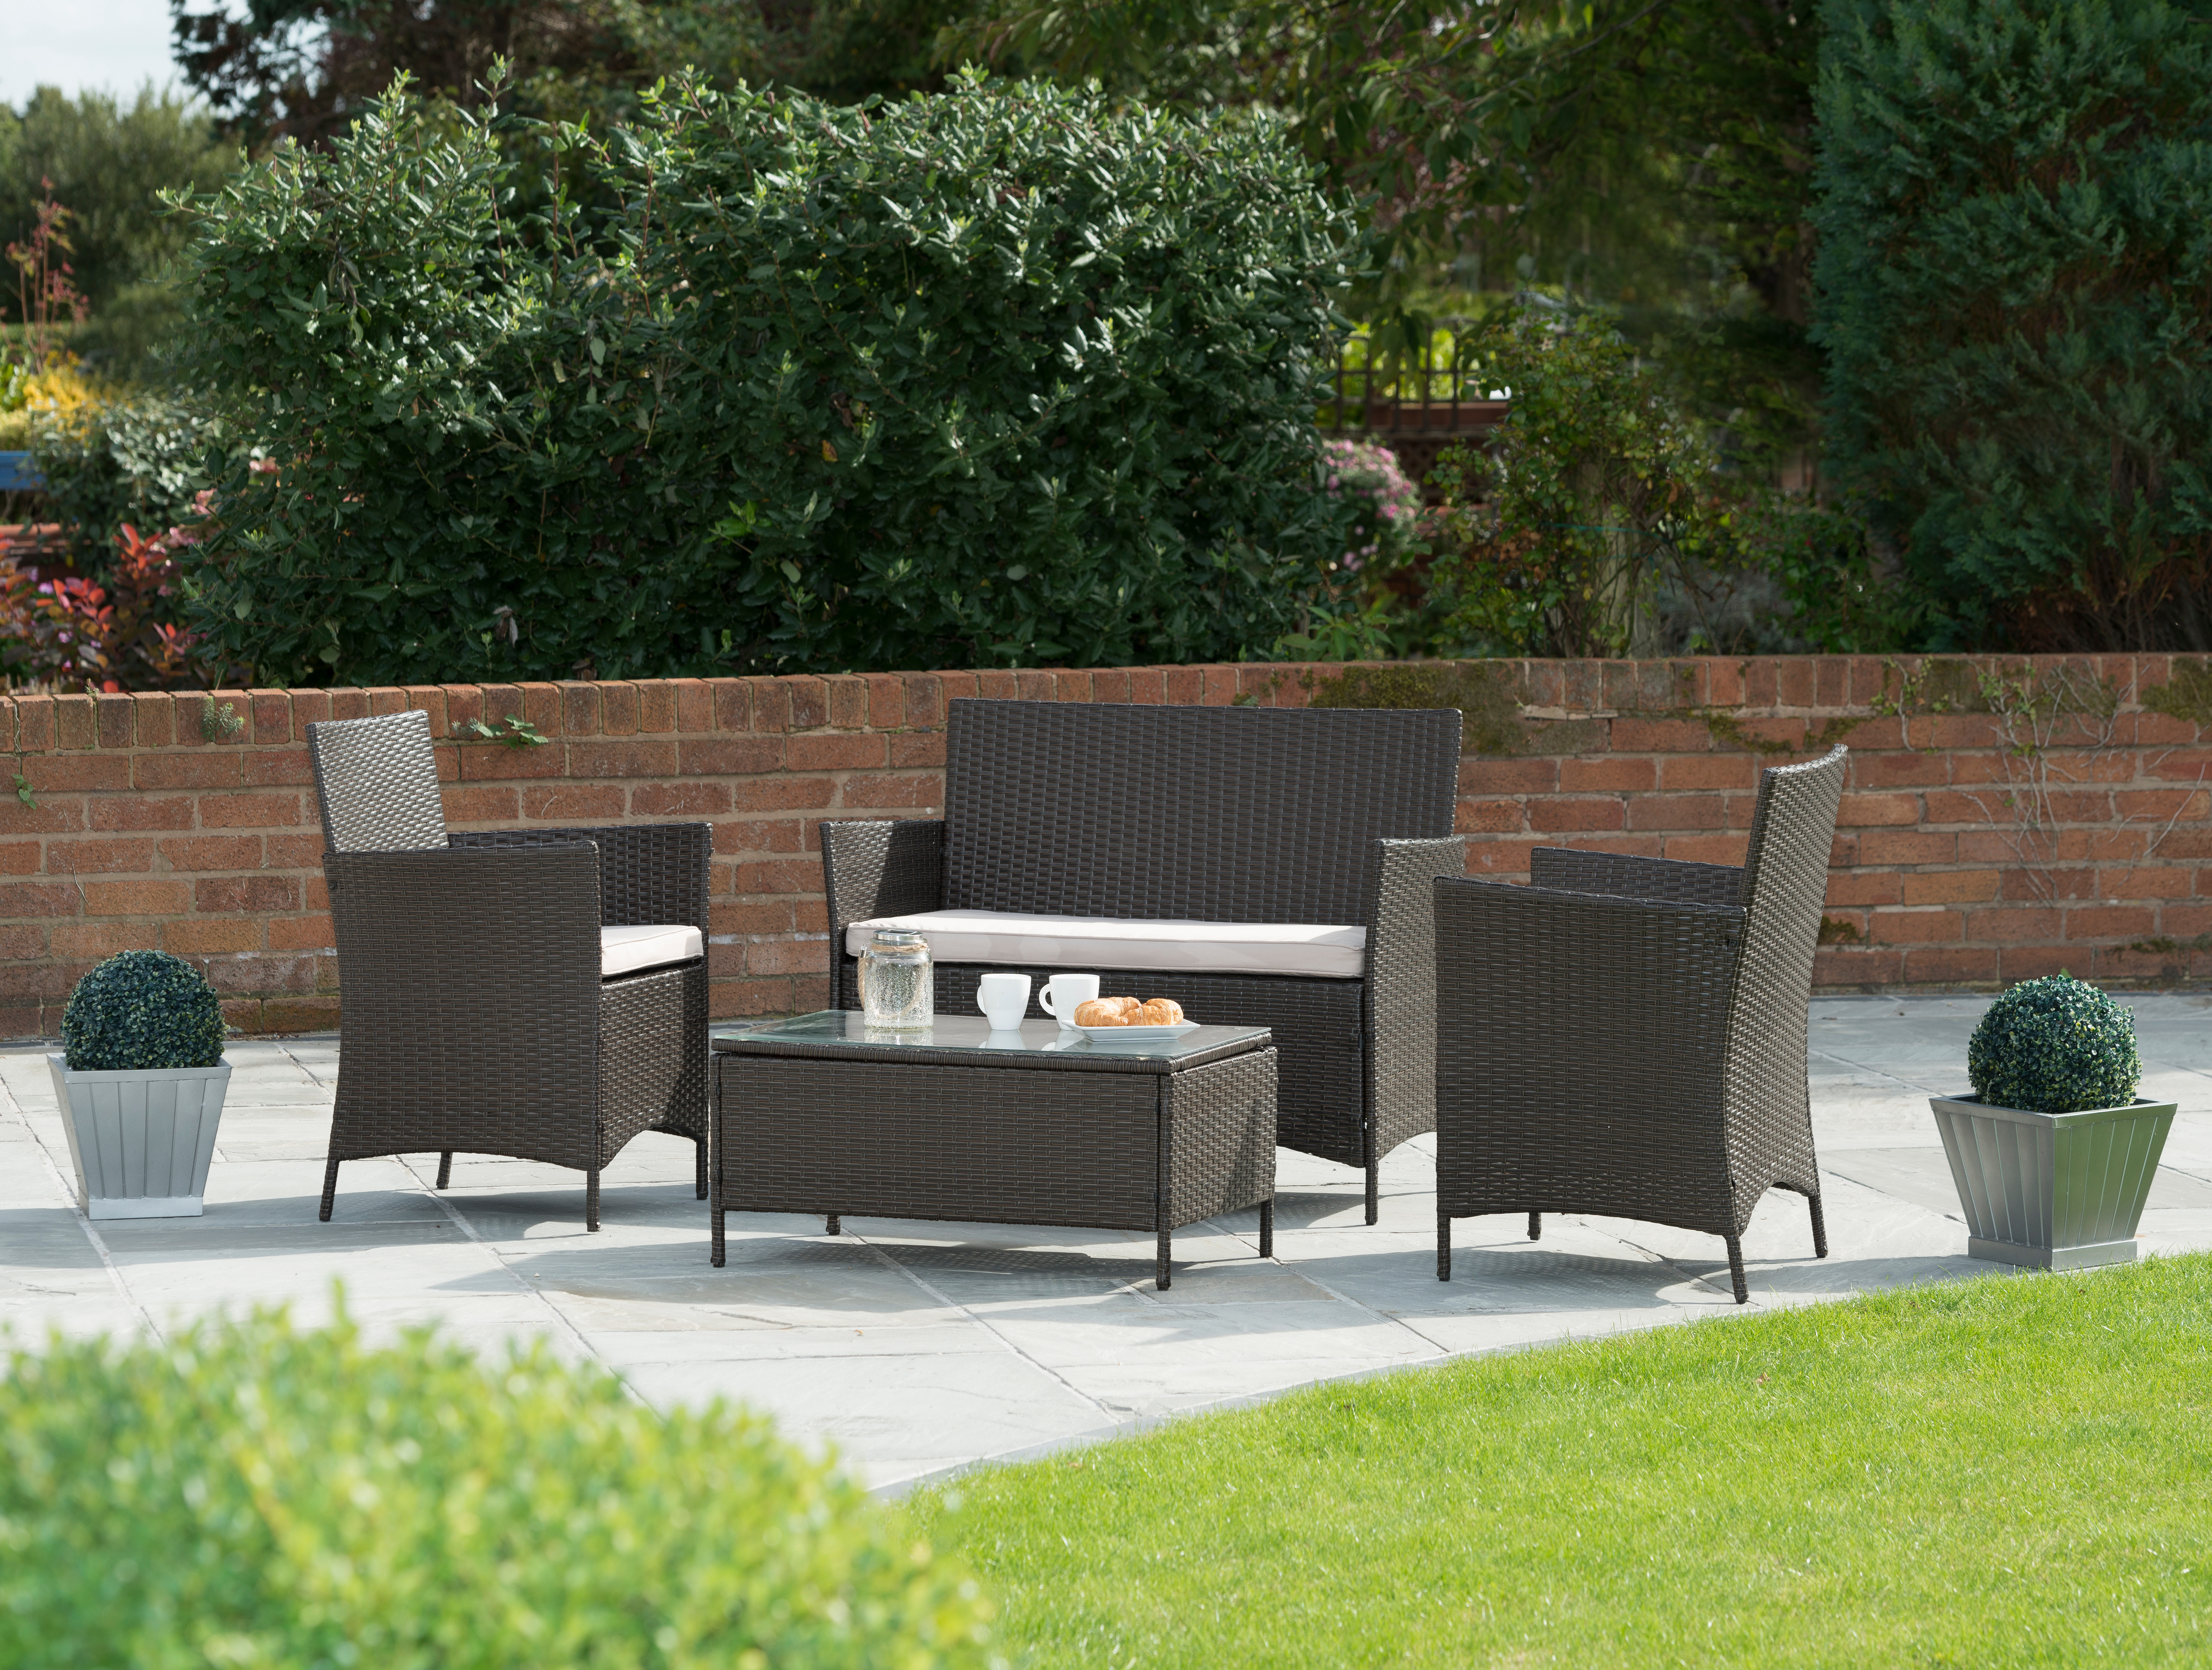 Bms Four Seater Garden Furniture Set With Table Worth 90 regarding measurements 6506 X 4912